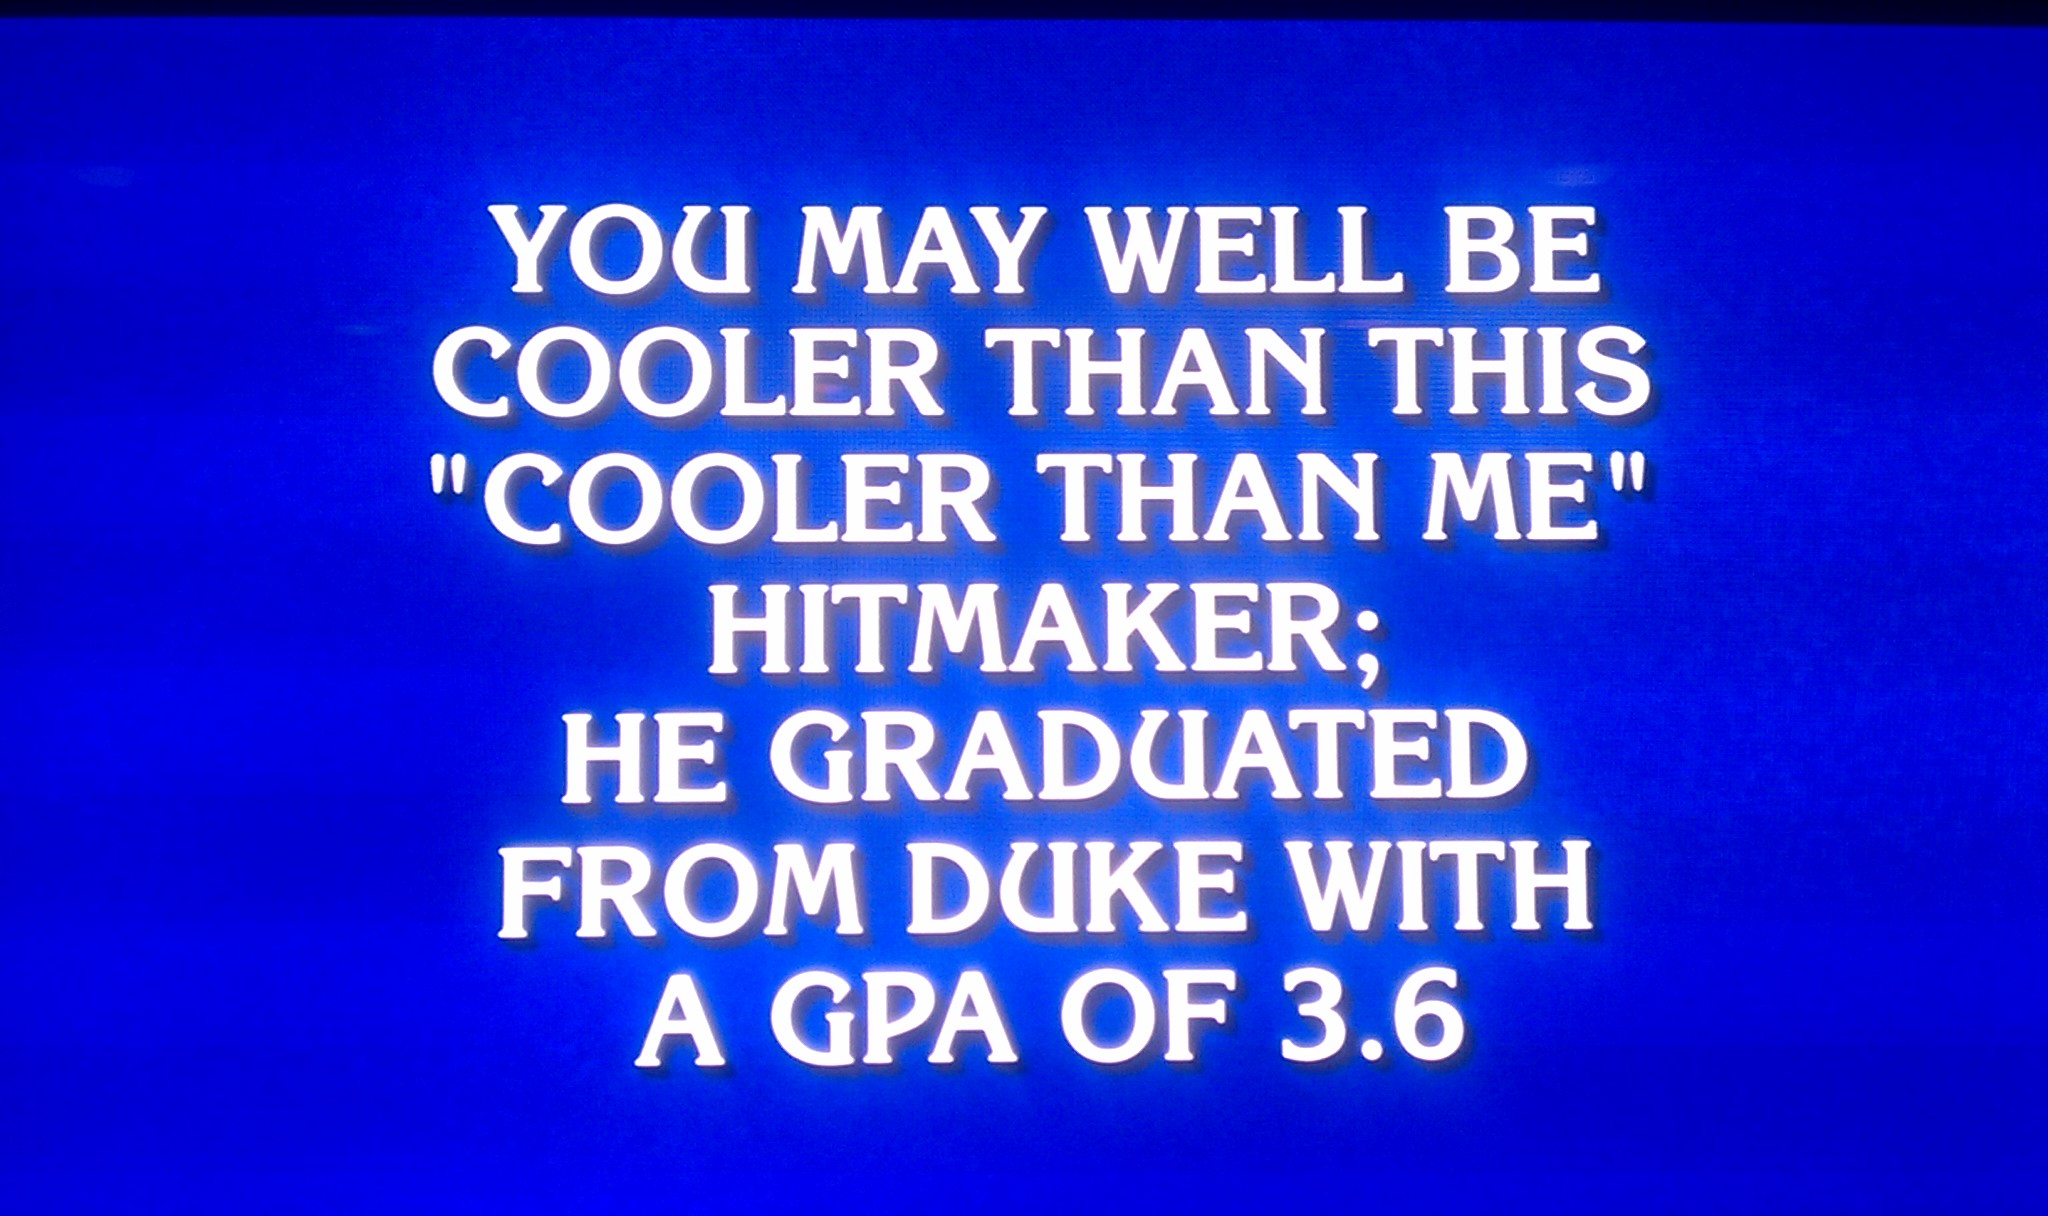 Mike Posner mentioned on Jeopardy 2011
